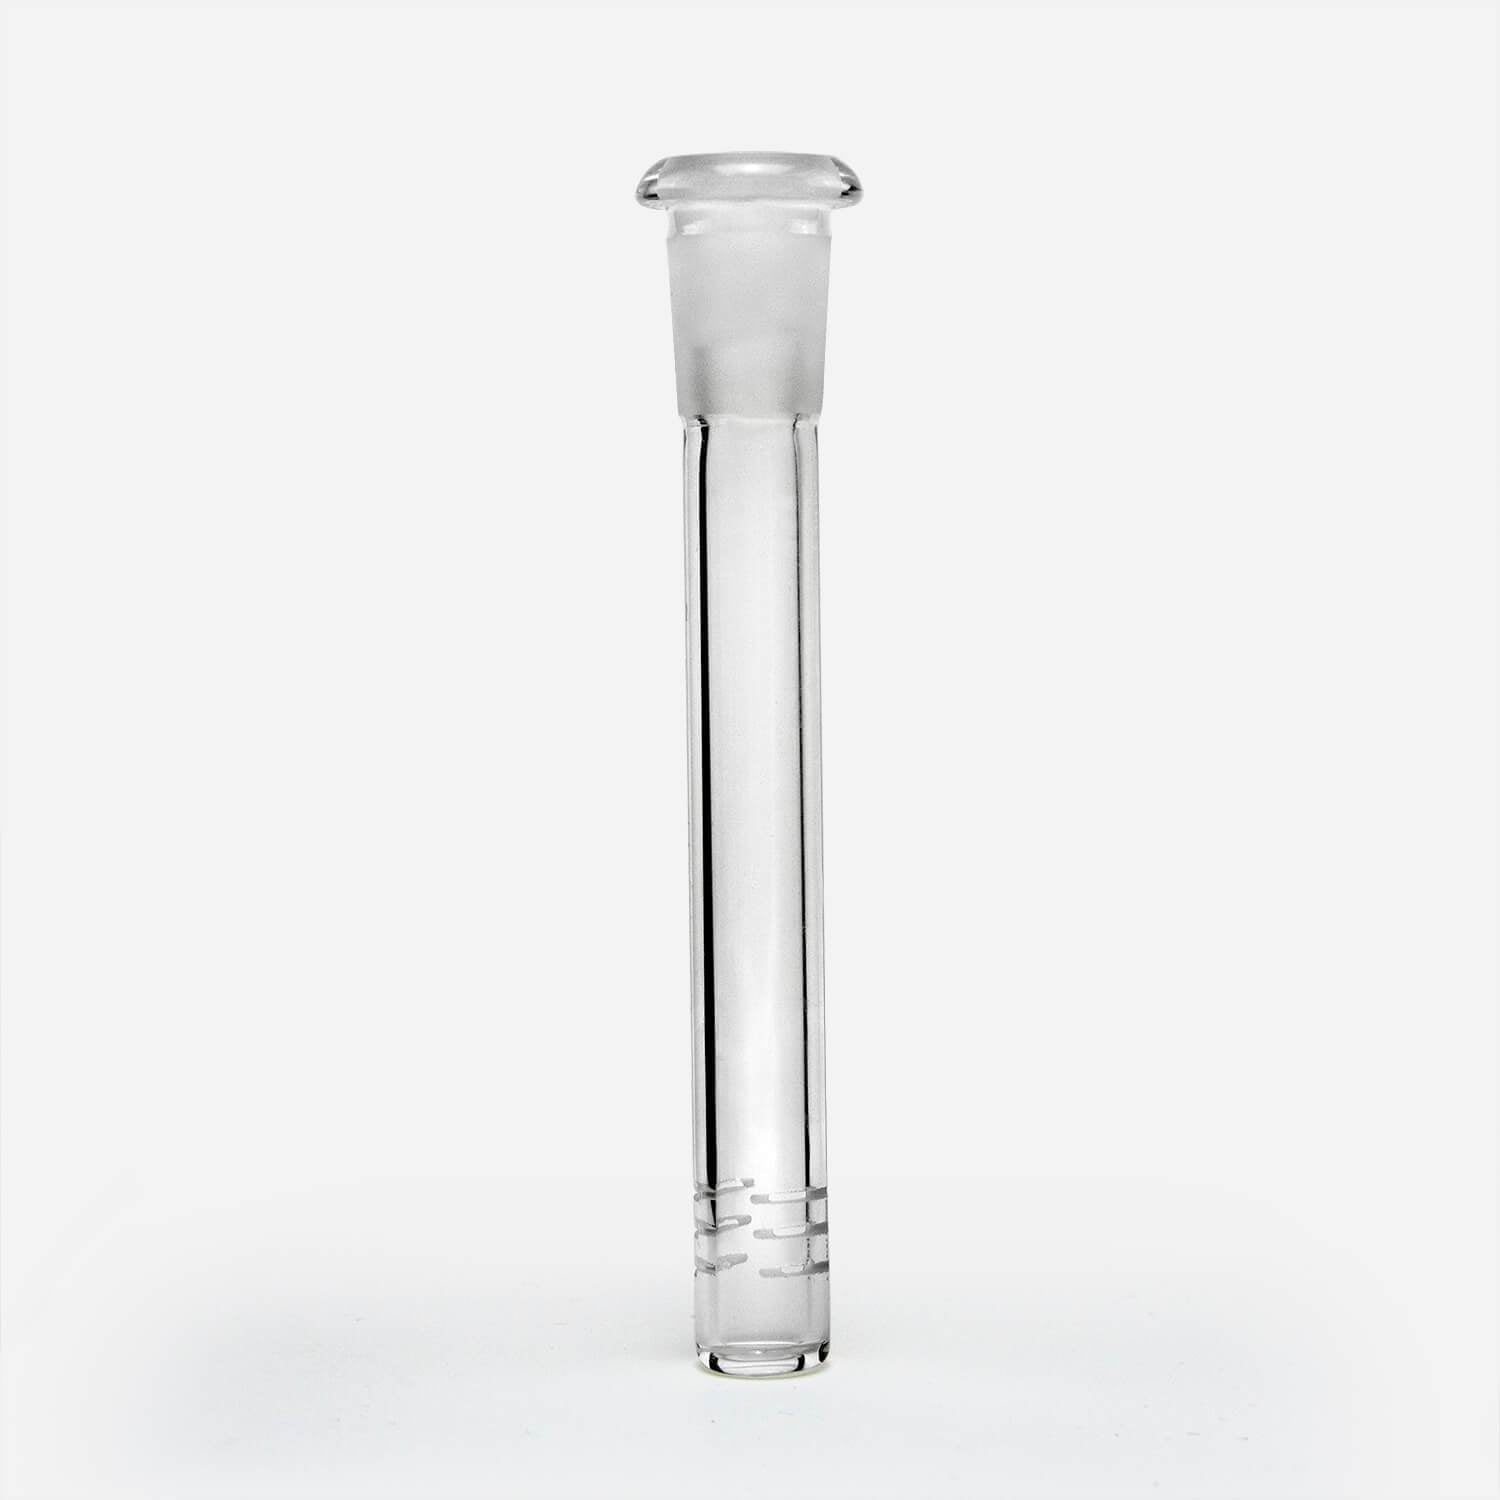 18mm To 14mm Diffused Downstem - PILOT DIARY